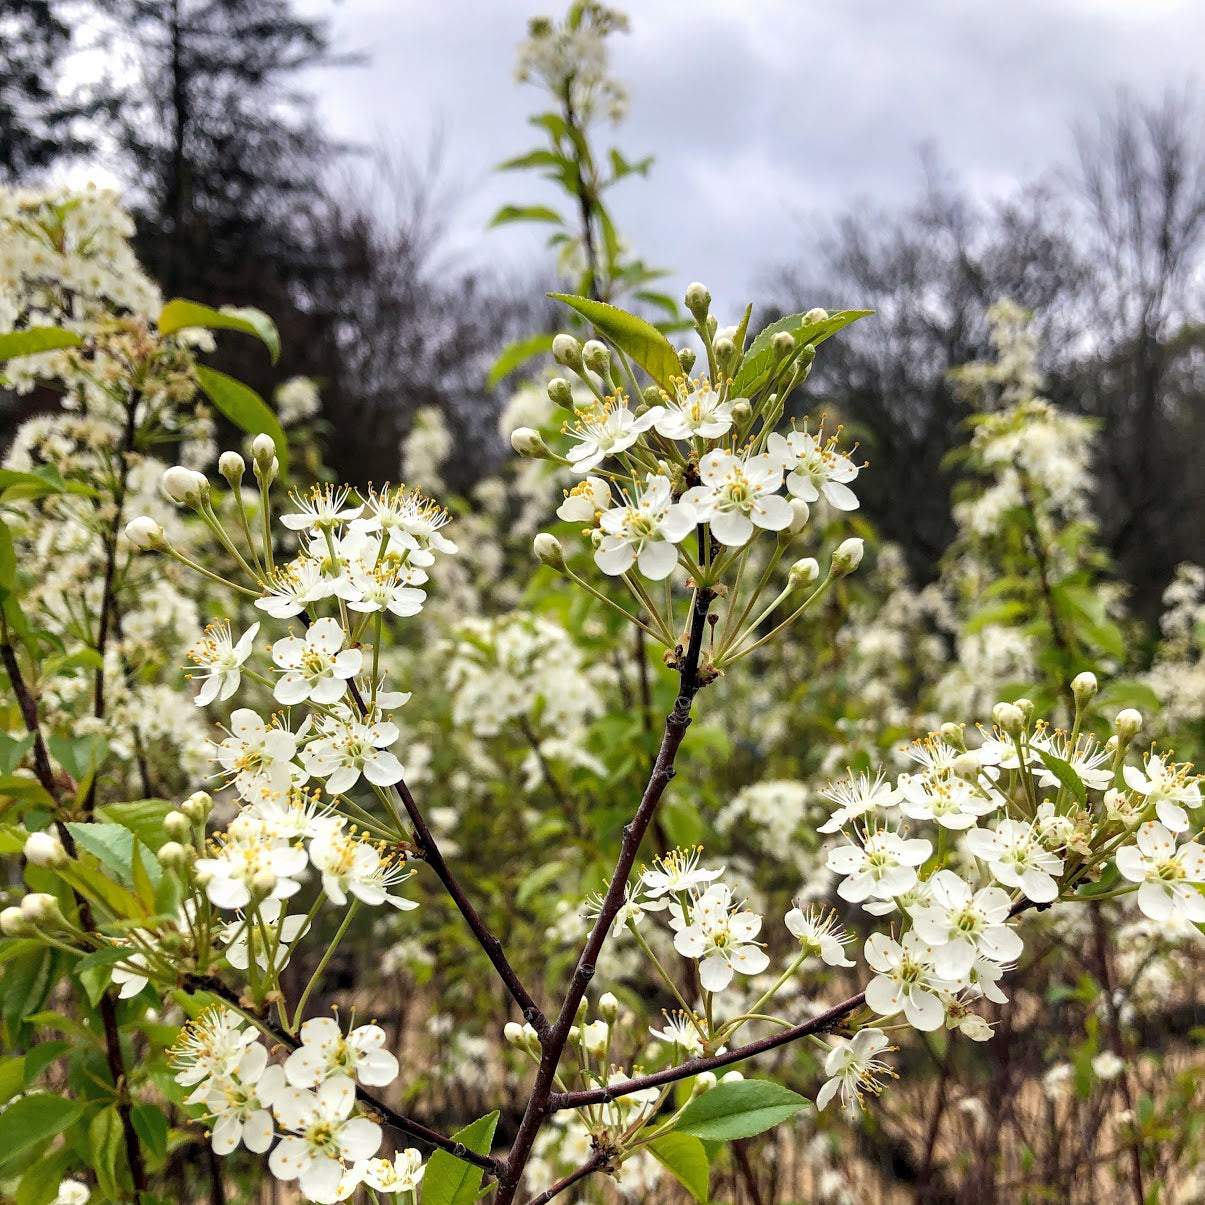 Ontario native Pin Cherry trees blooming in spring